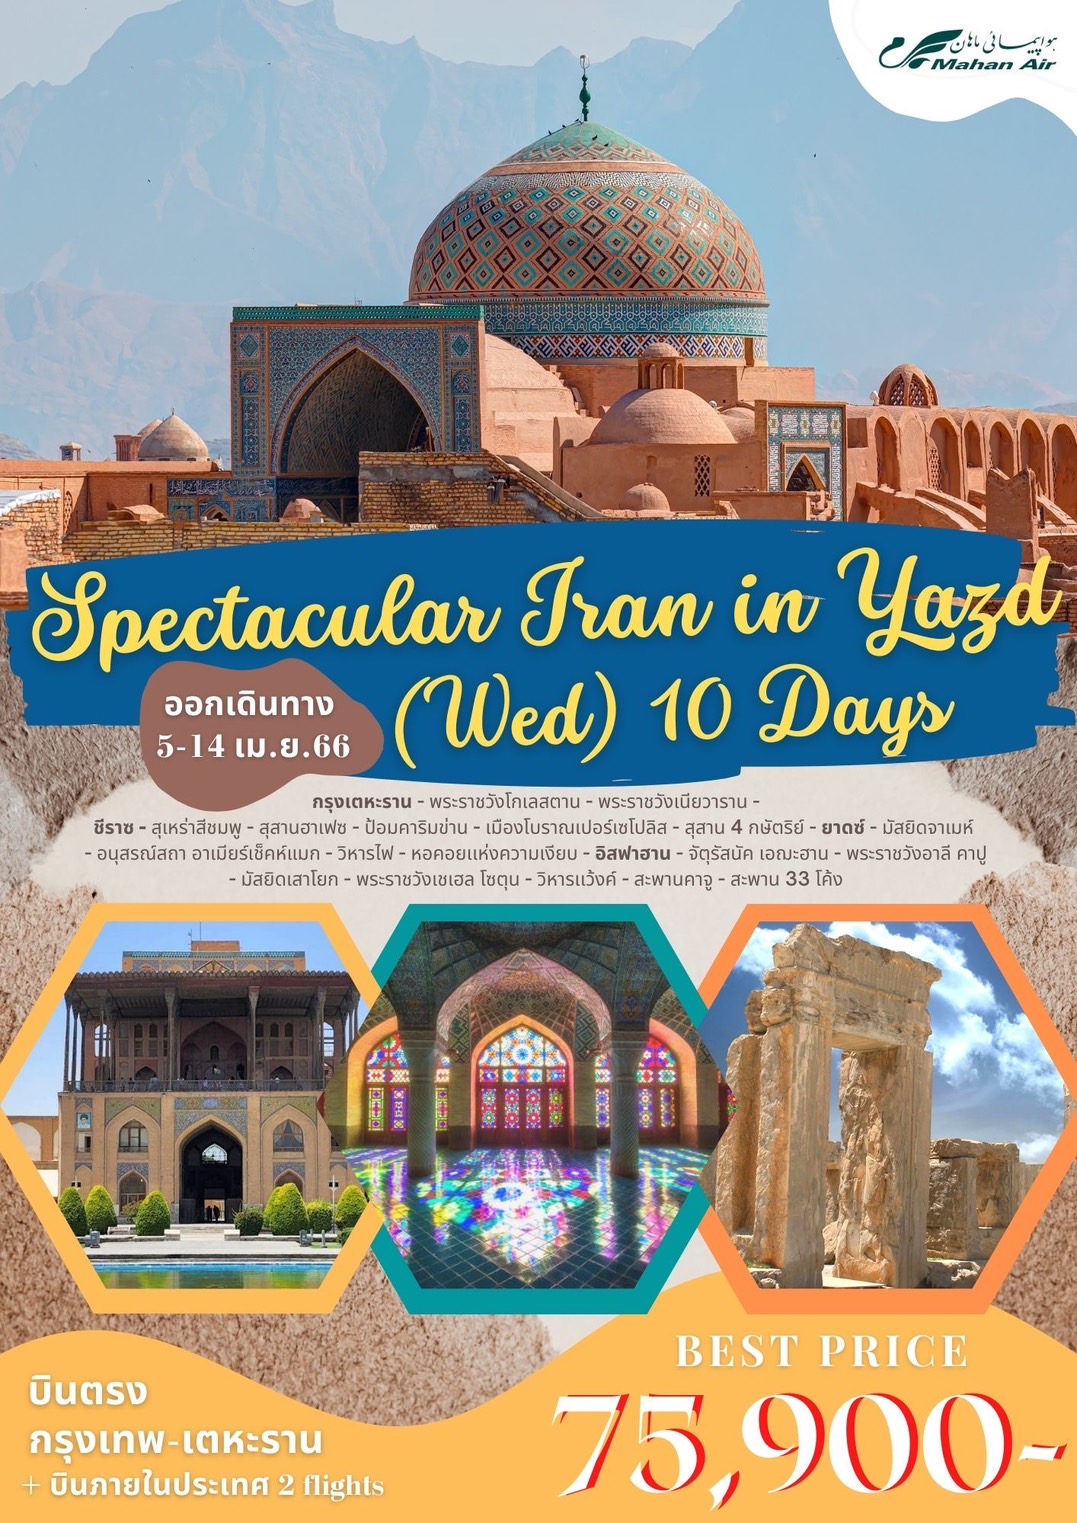 Spectacular Persia In Yadz (Wed) 10 Days